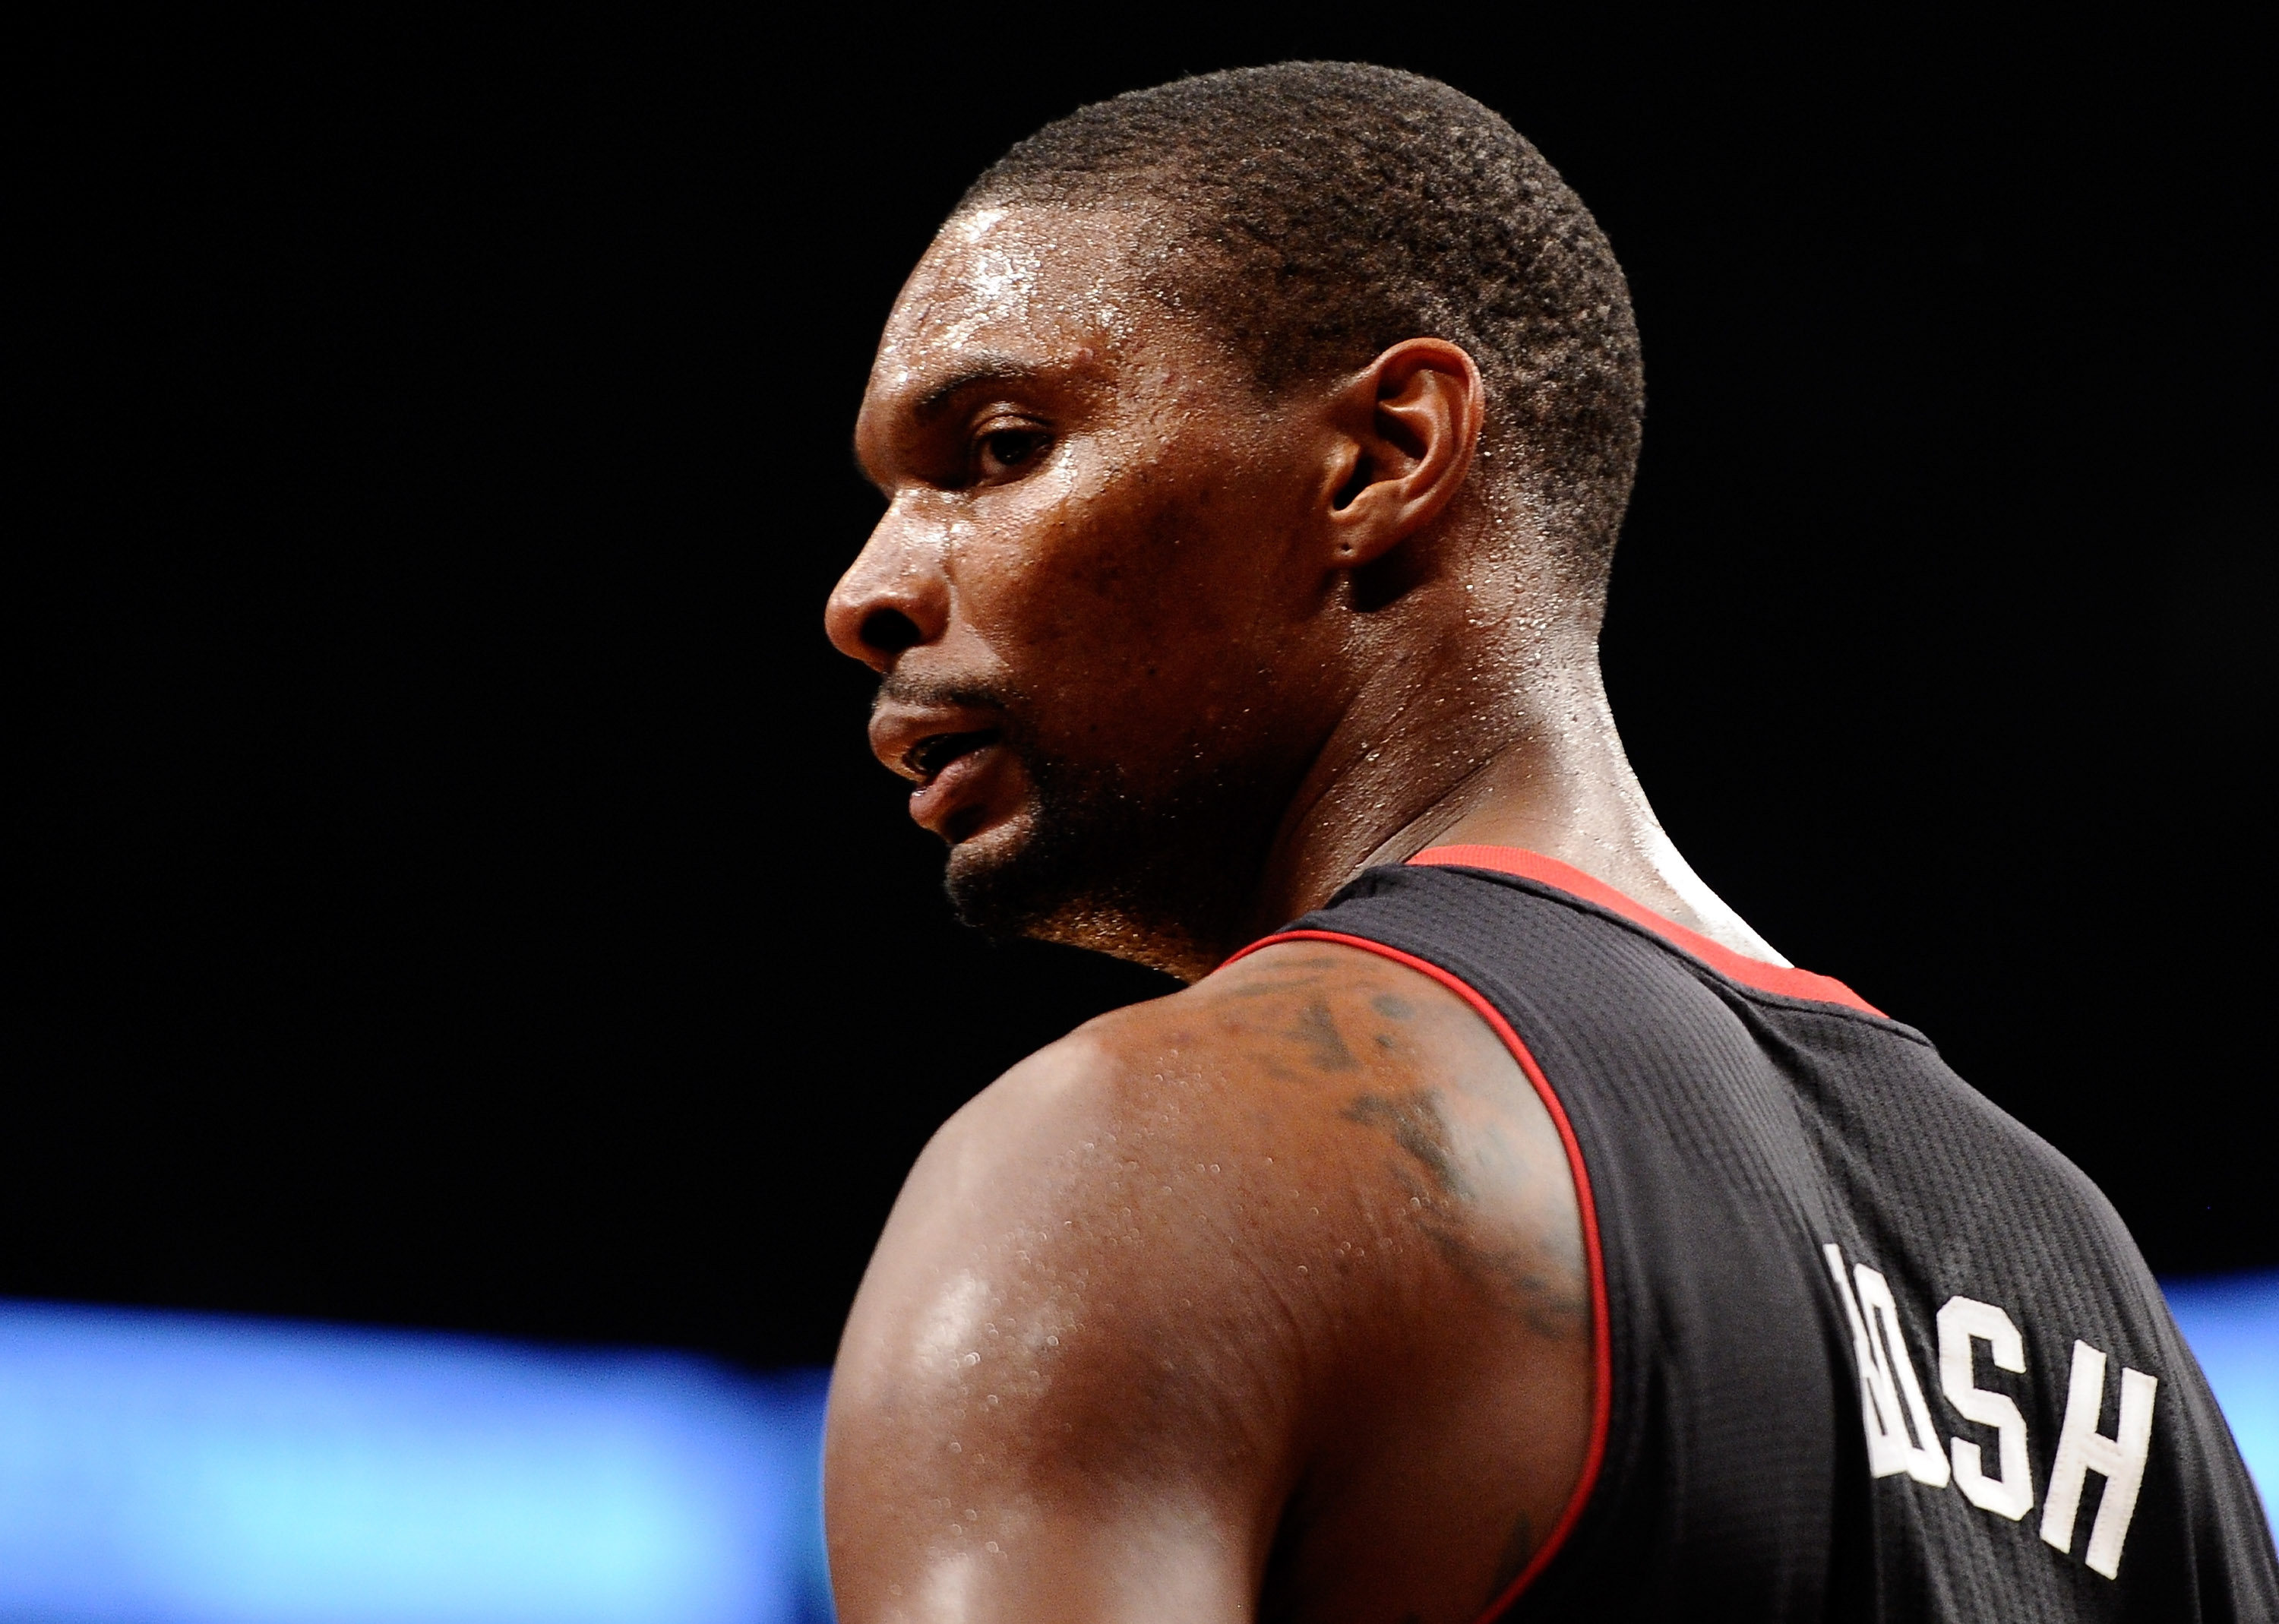 Chris Bosh joins the ranks of guys with back tattoos